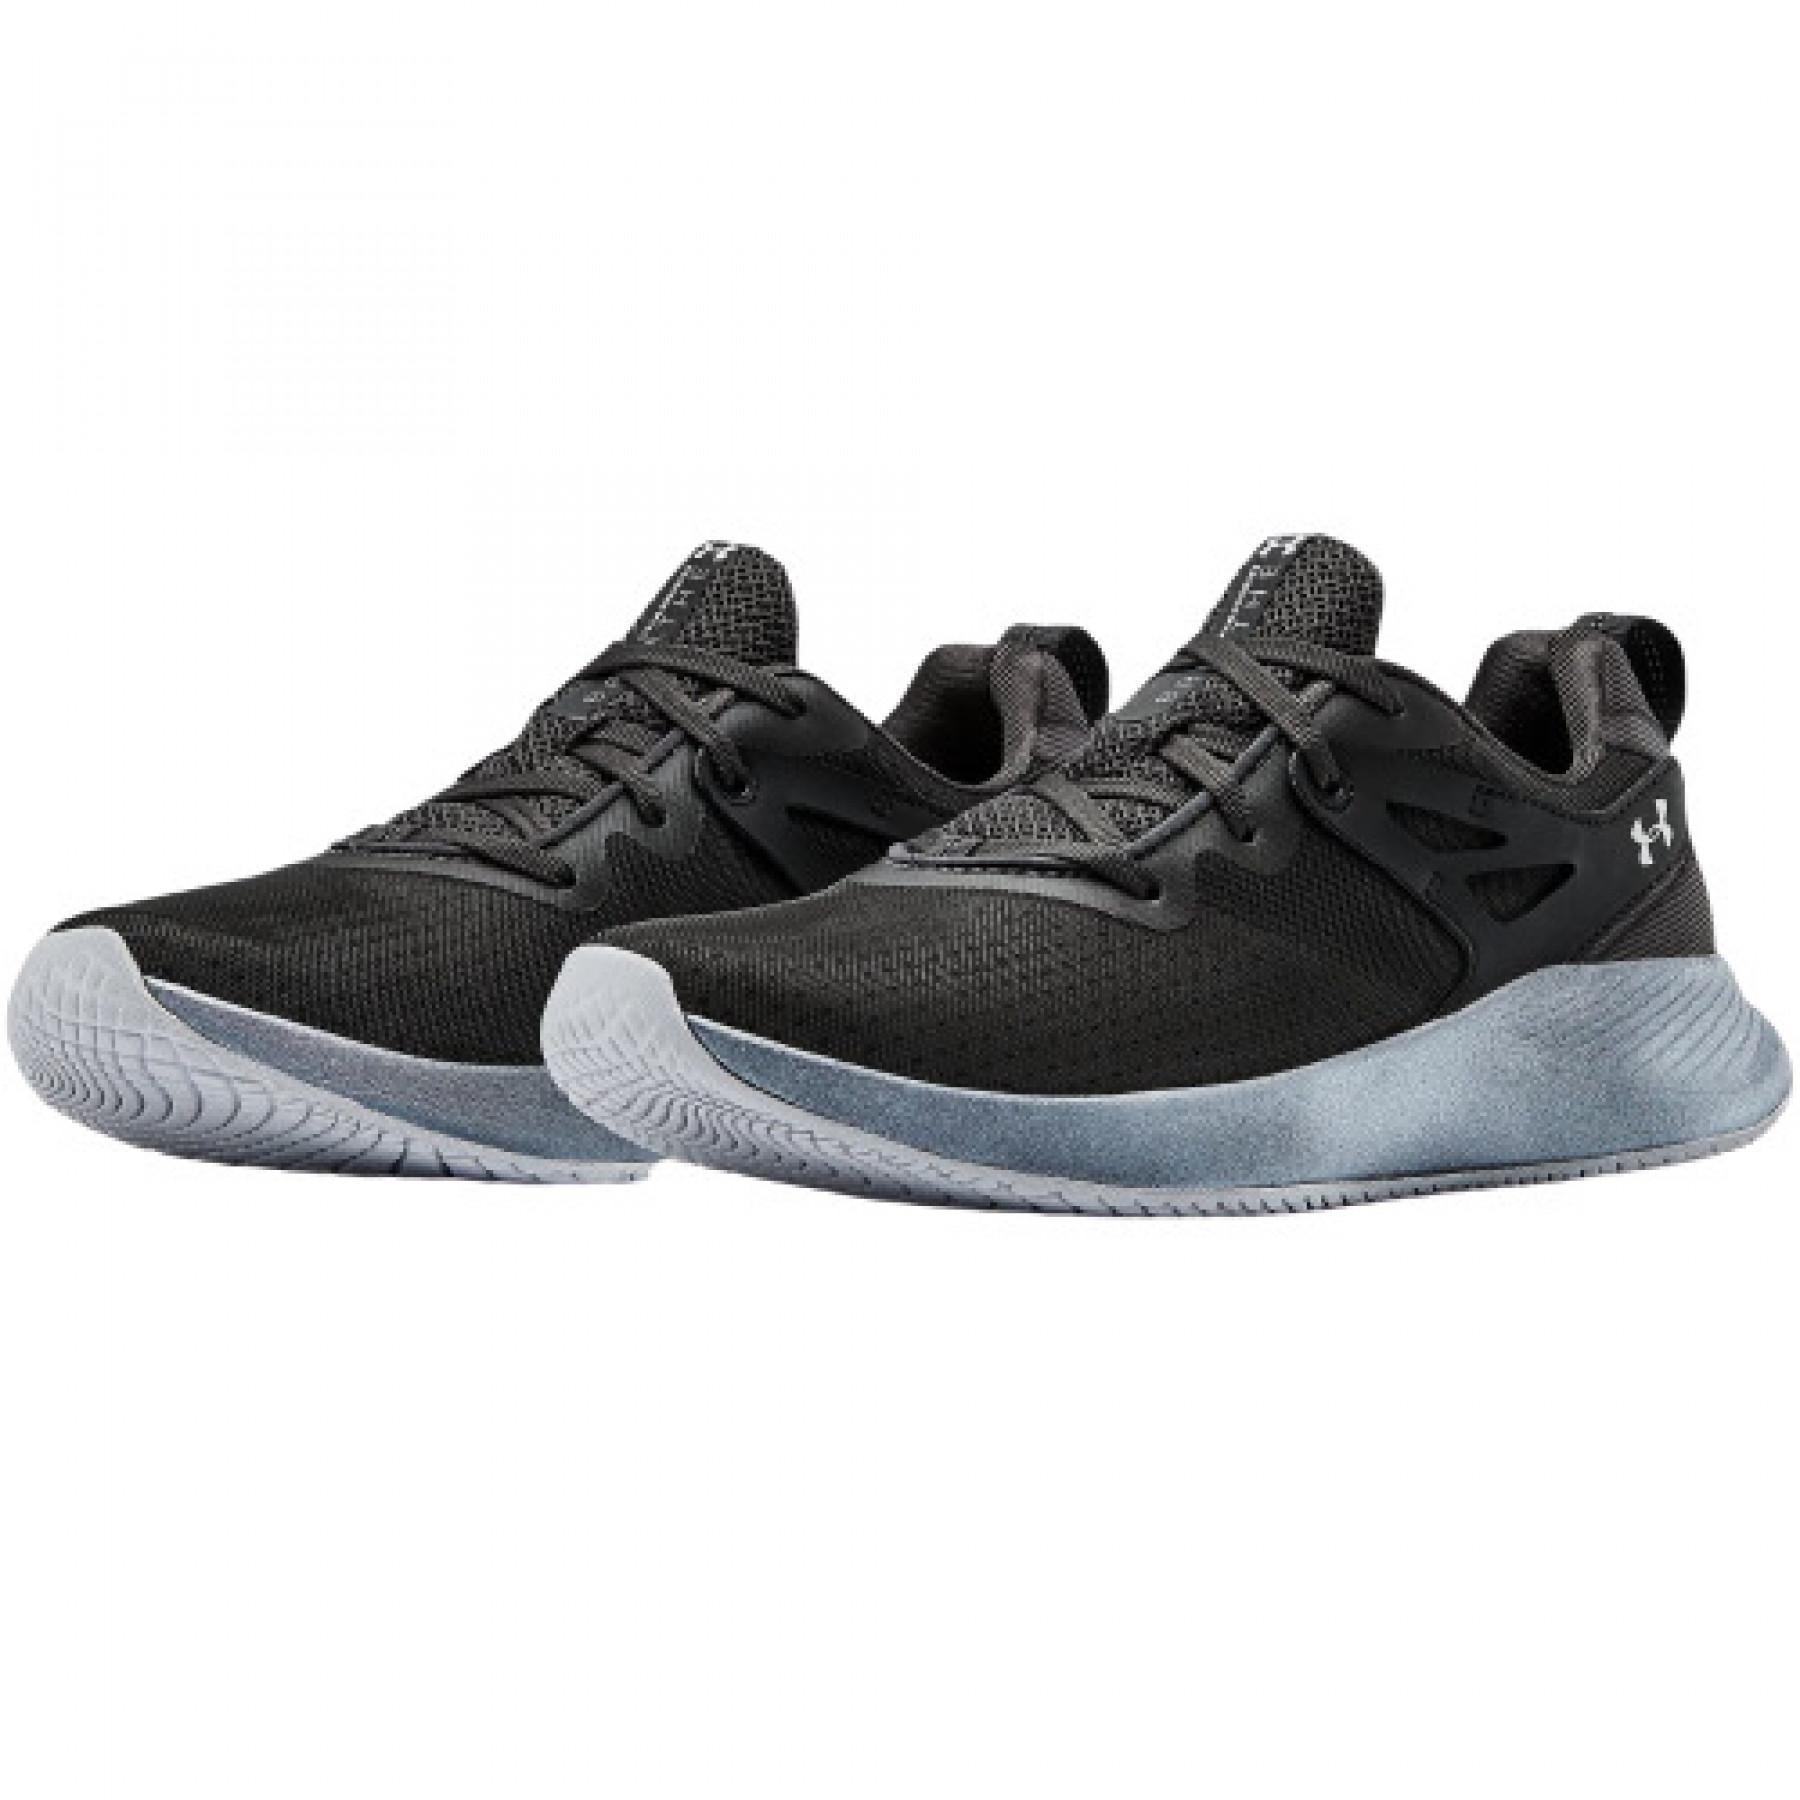 Chaussures femme Under Armour Charged Breathe TR 2